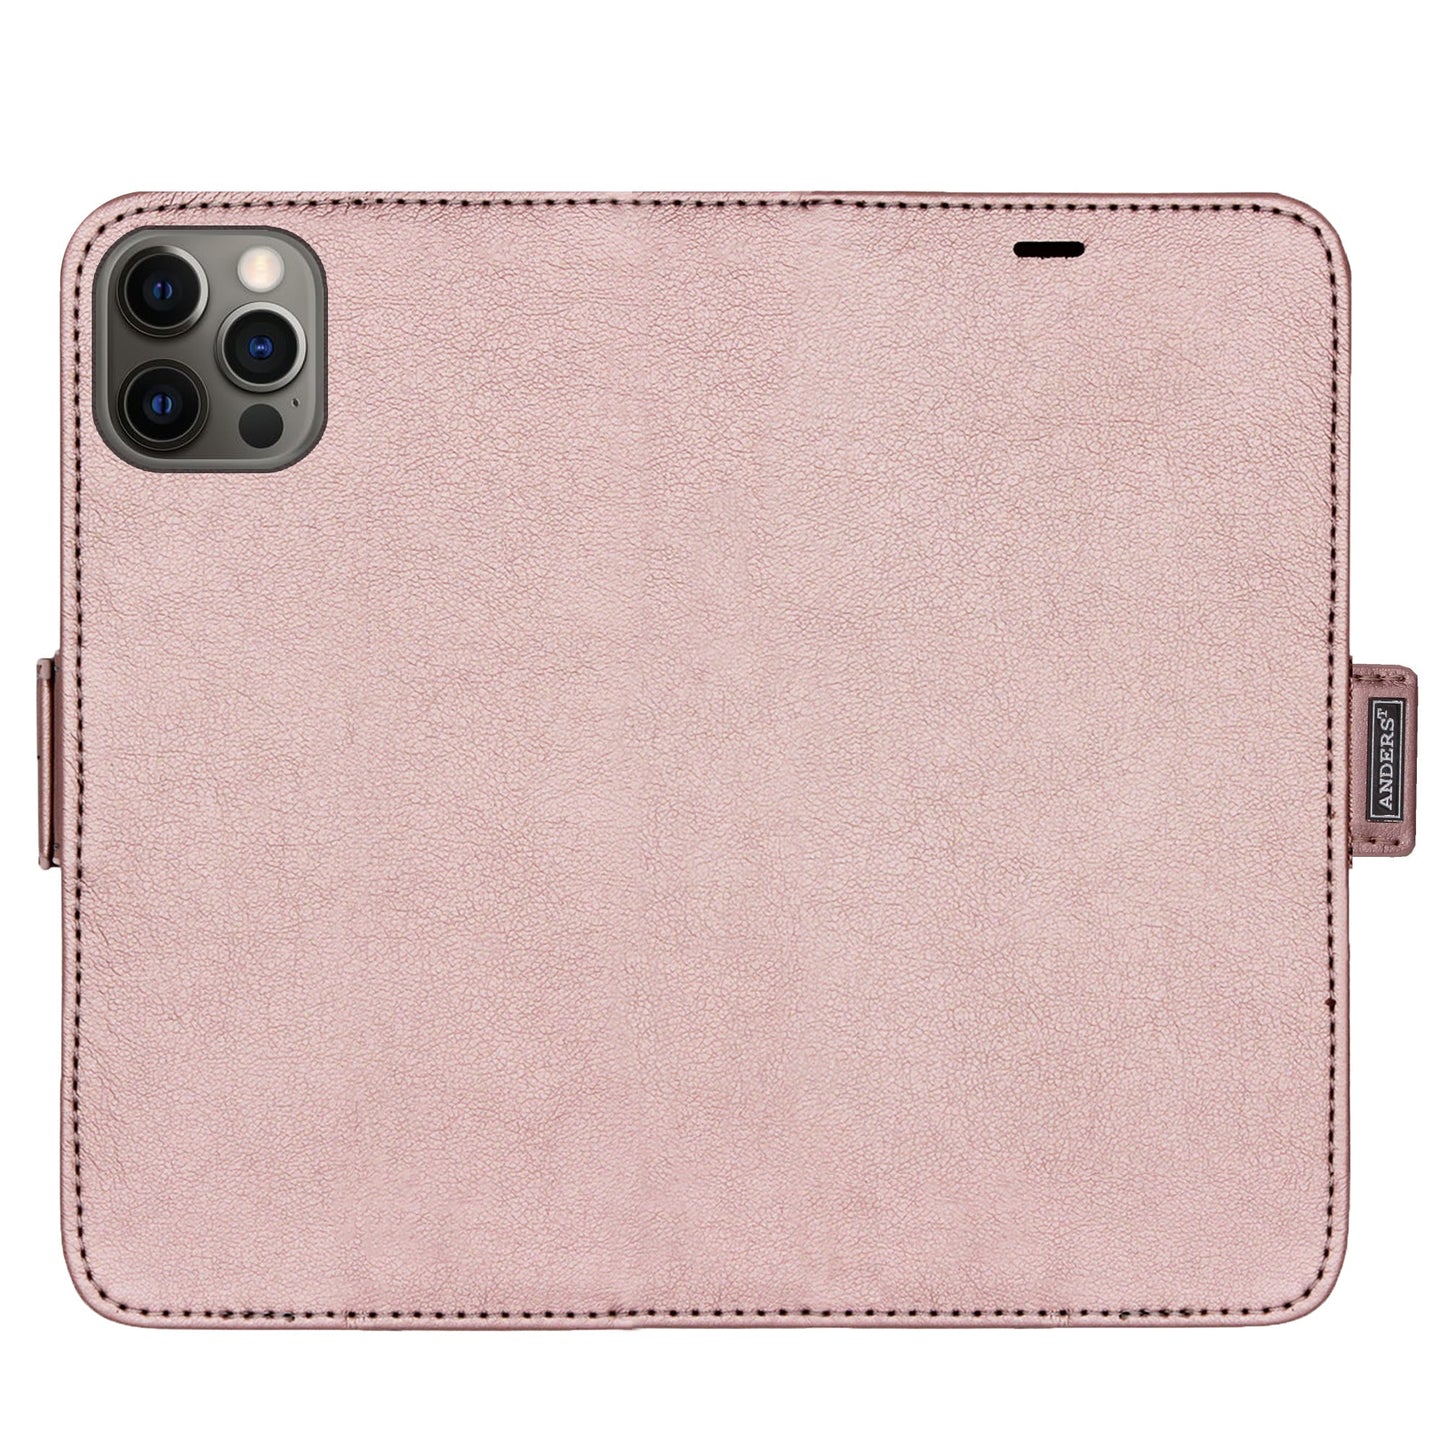 Solid Rose Gold Victor Case for iPhone 12/12 Pro